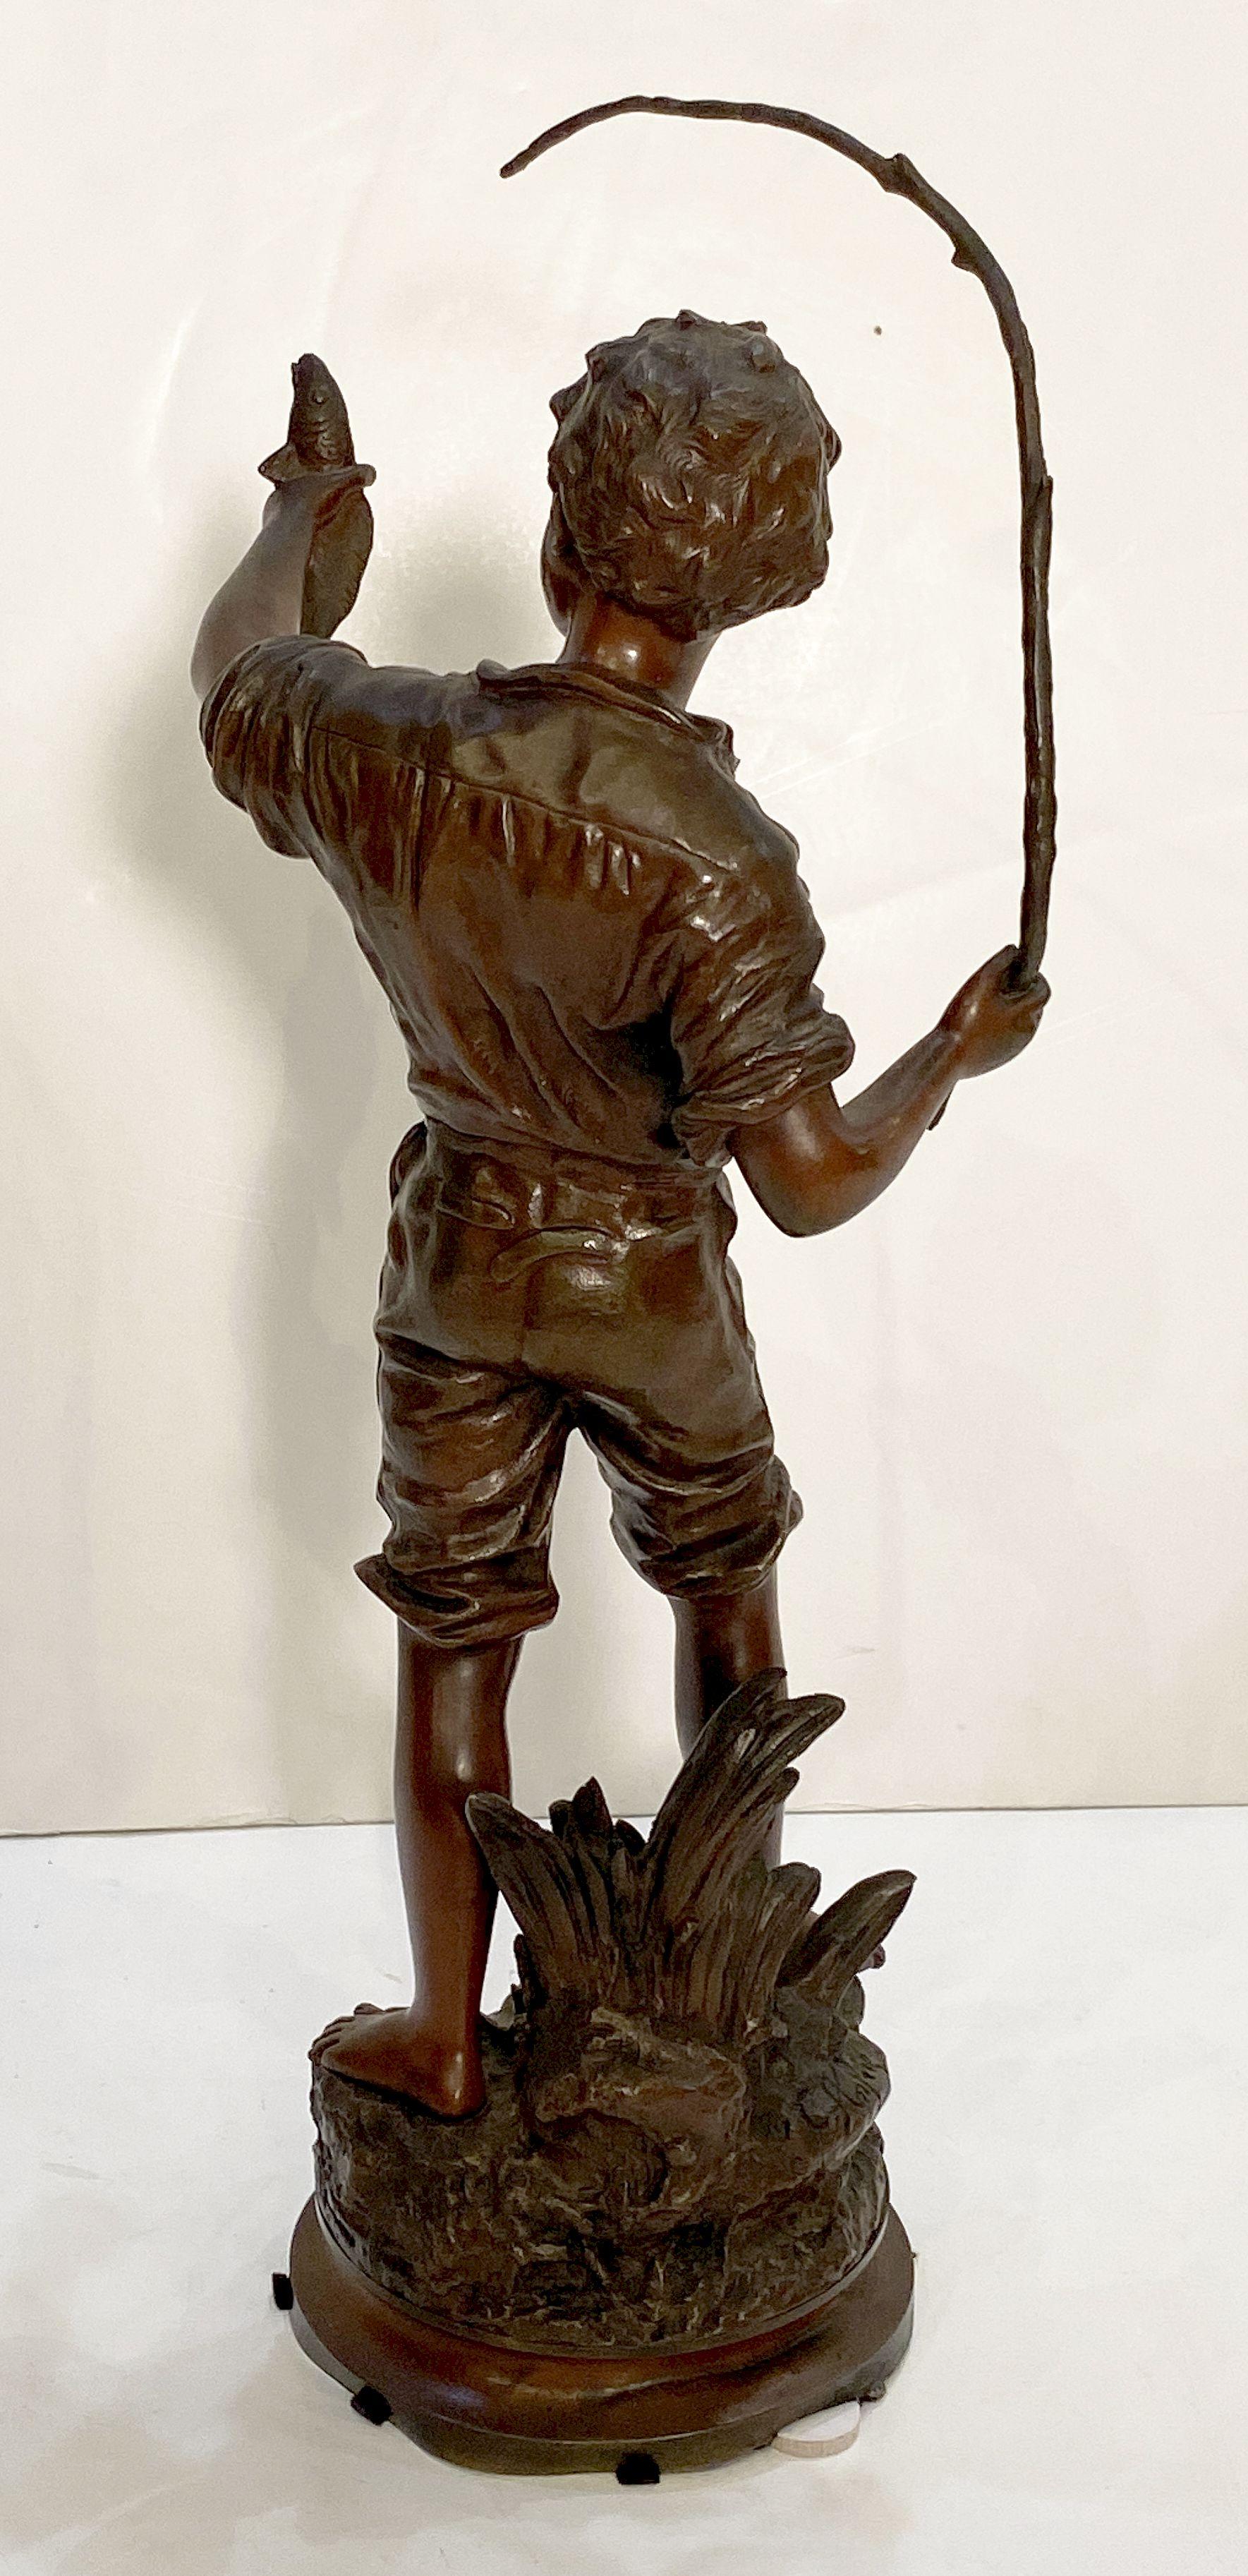 Heureux Pêcheur or Happy Fisherboy Bronze Sculptural Figure by Charles Anfrie  7